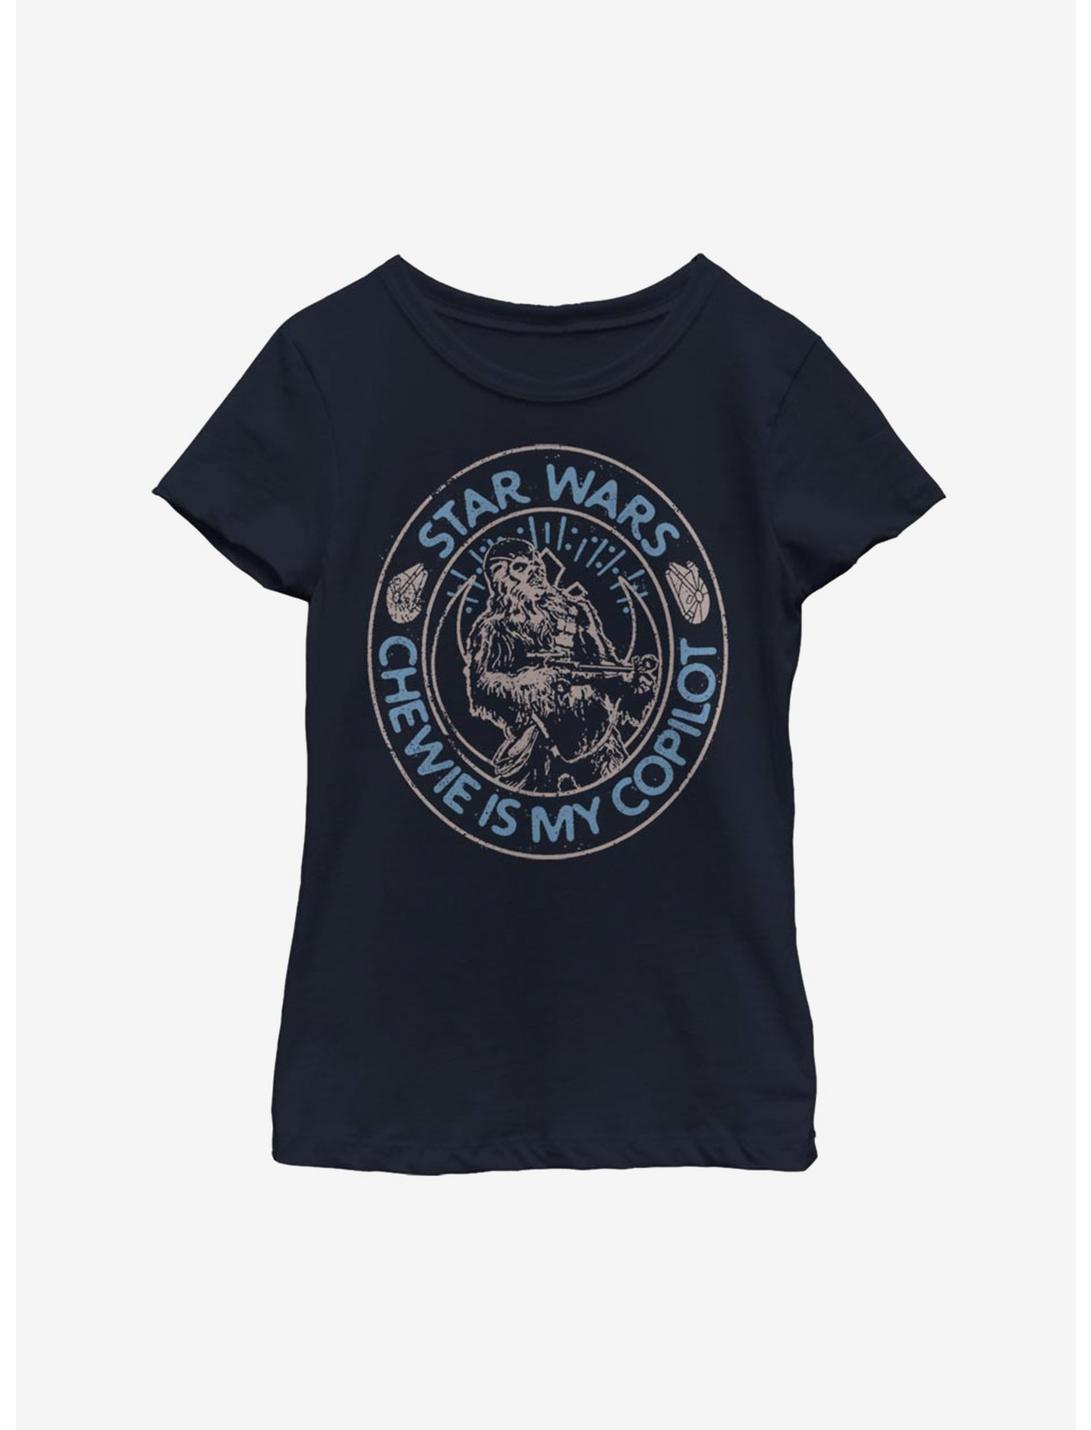 Star Wars Episode IX The Rise Of Skywalker Way of the Wookiee Youth Girls T-Shirt, NAVY, hi-res